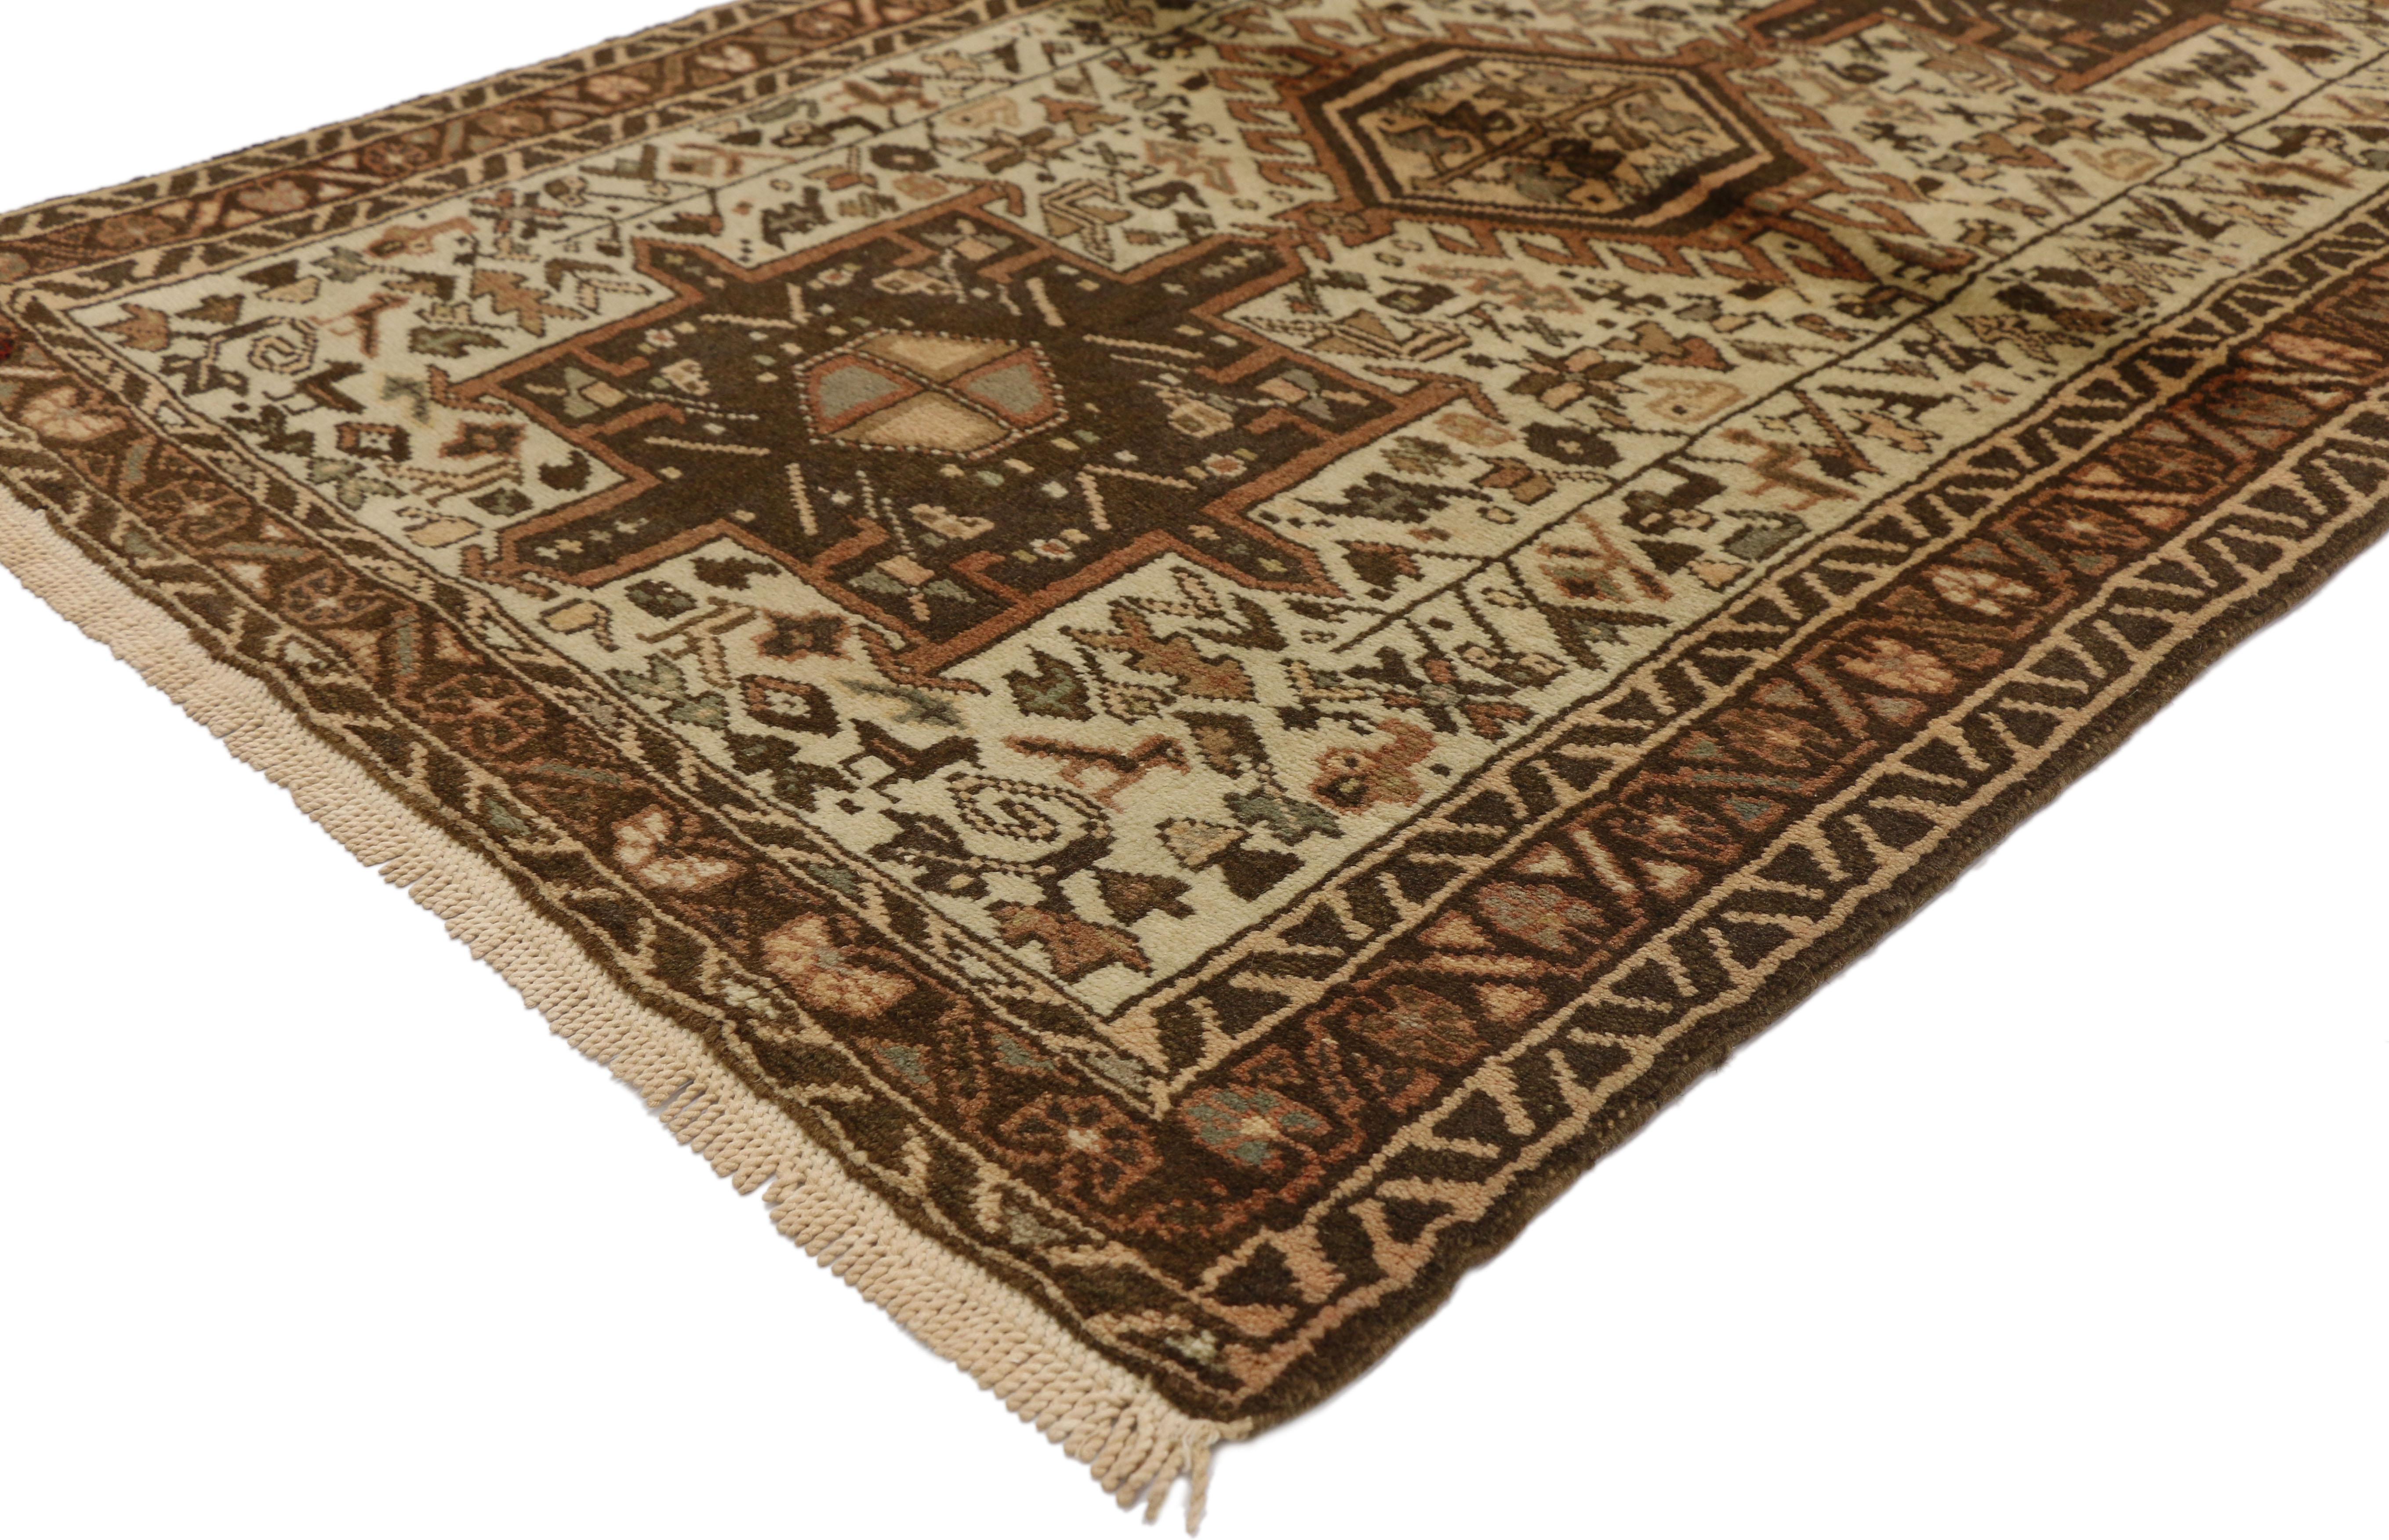 60331 Vintage Persian Karaja Heriz Accent rug with Mid-Century Modern style. This hand knotted wool vintage Persian Heriz Karaja rug features a latch-hook octogram amulet flanked by two square cruciform medallions surrounded by symbolic geometric